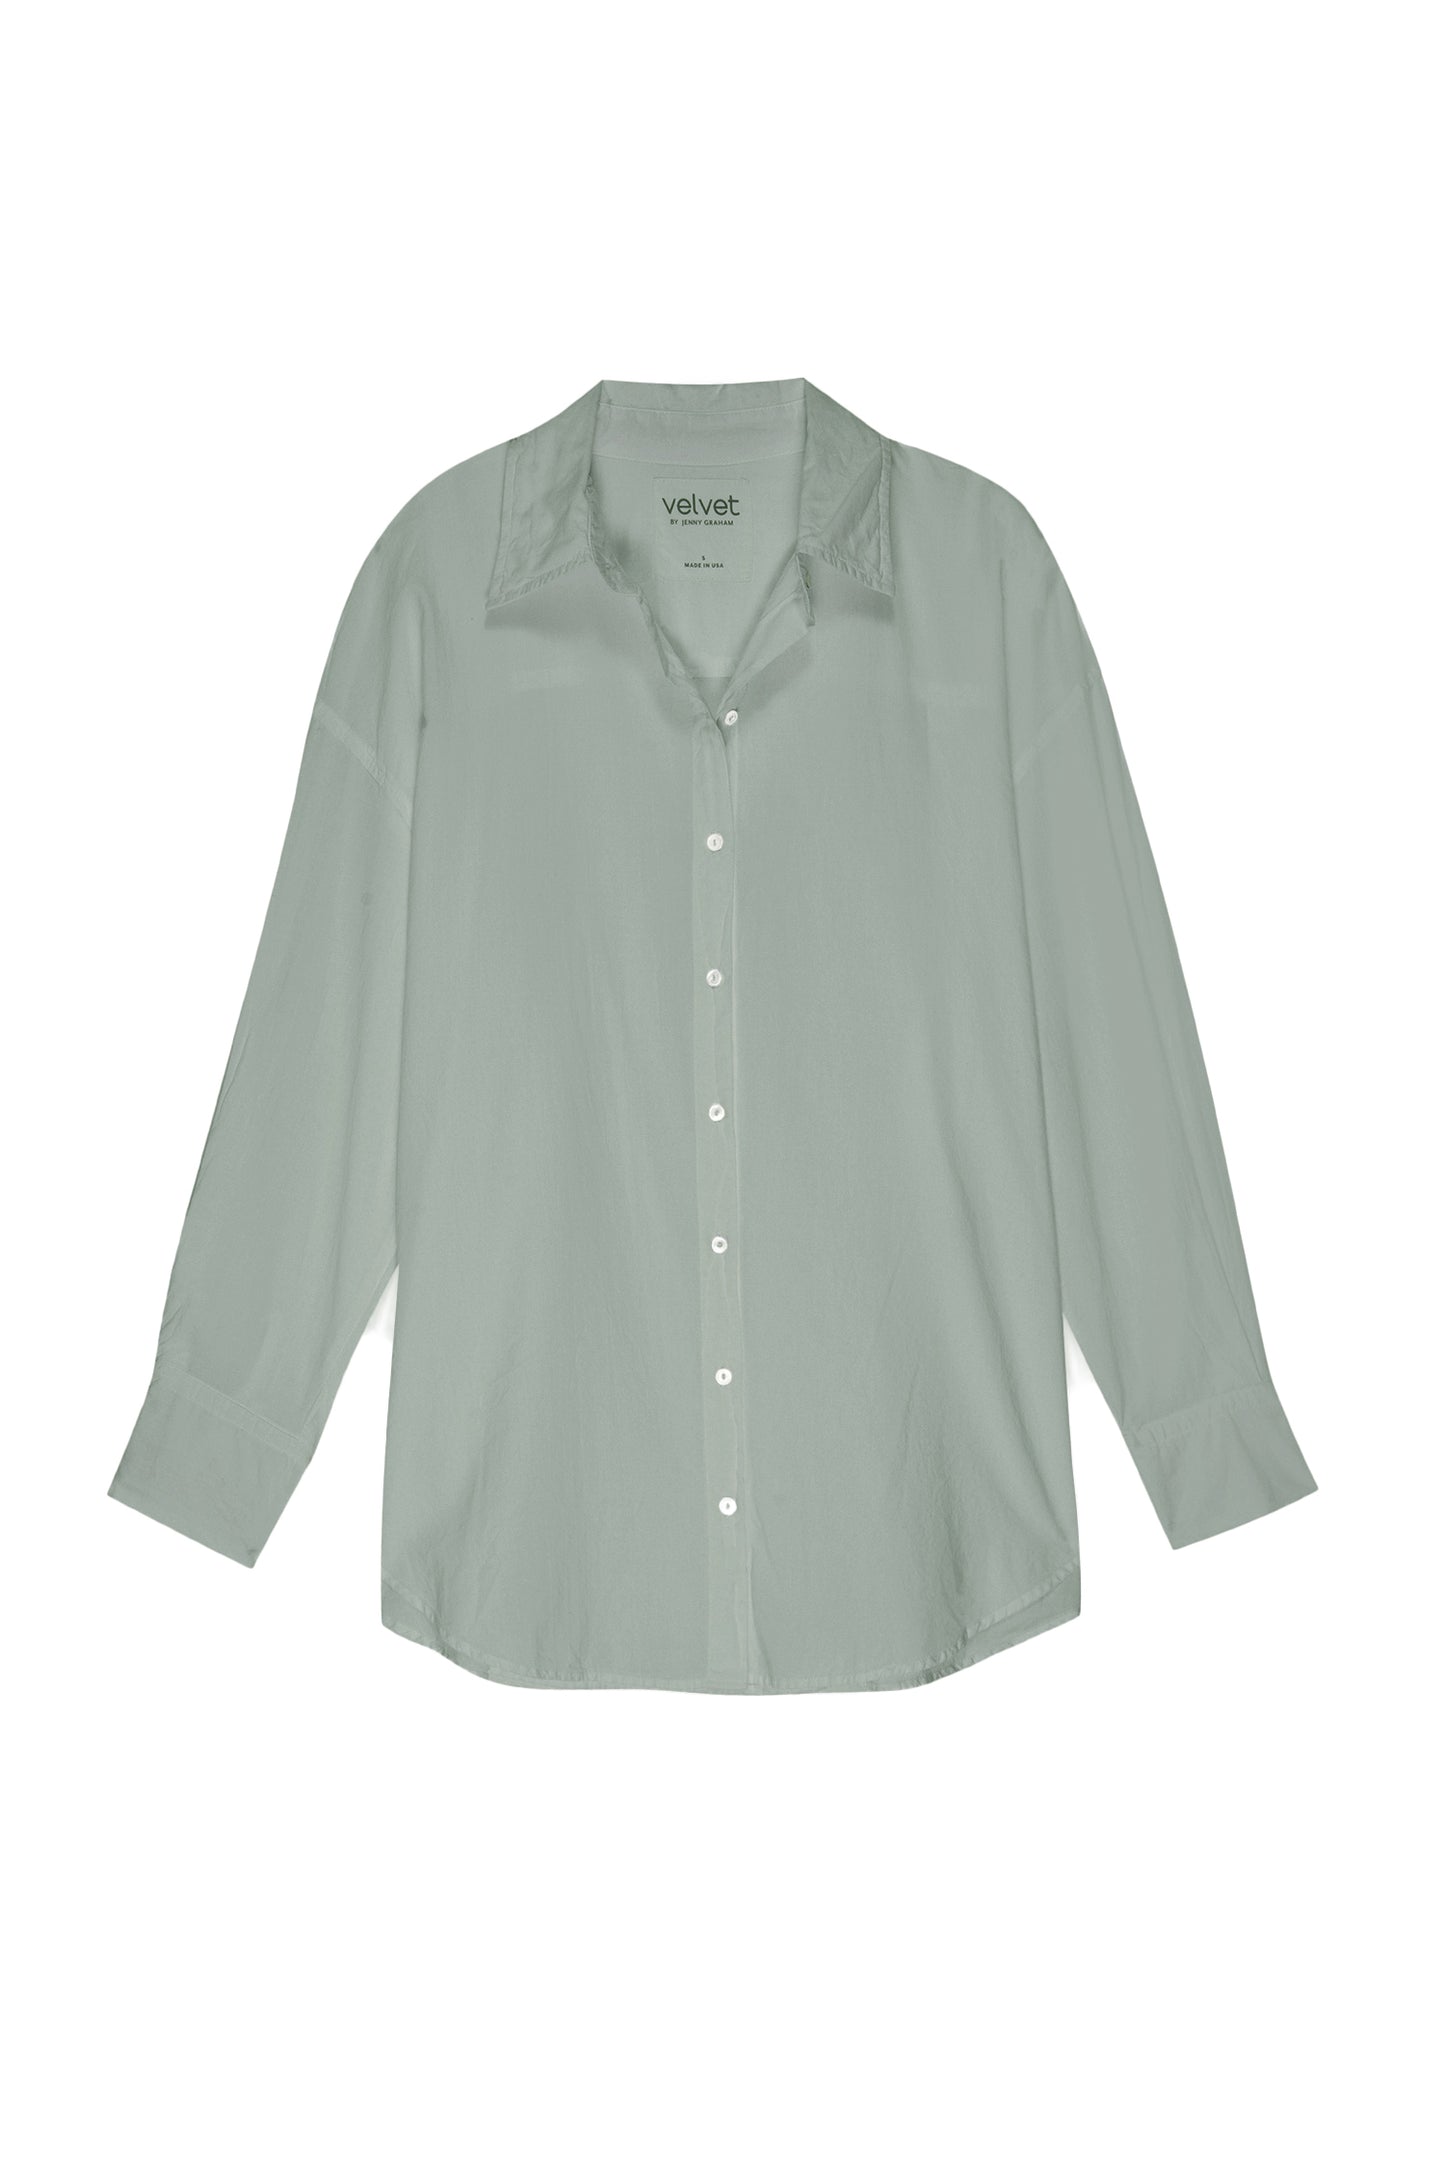 a women's REDONDO BUTTON-UP SHIRT in a light shade of green, by Velvet by Jenny Graham.-26293136523457